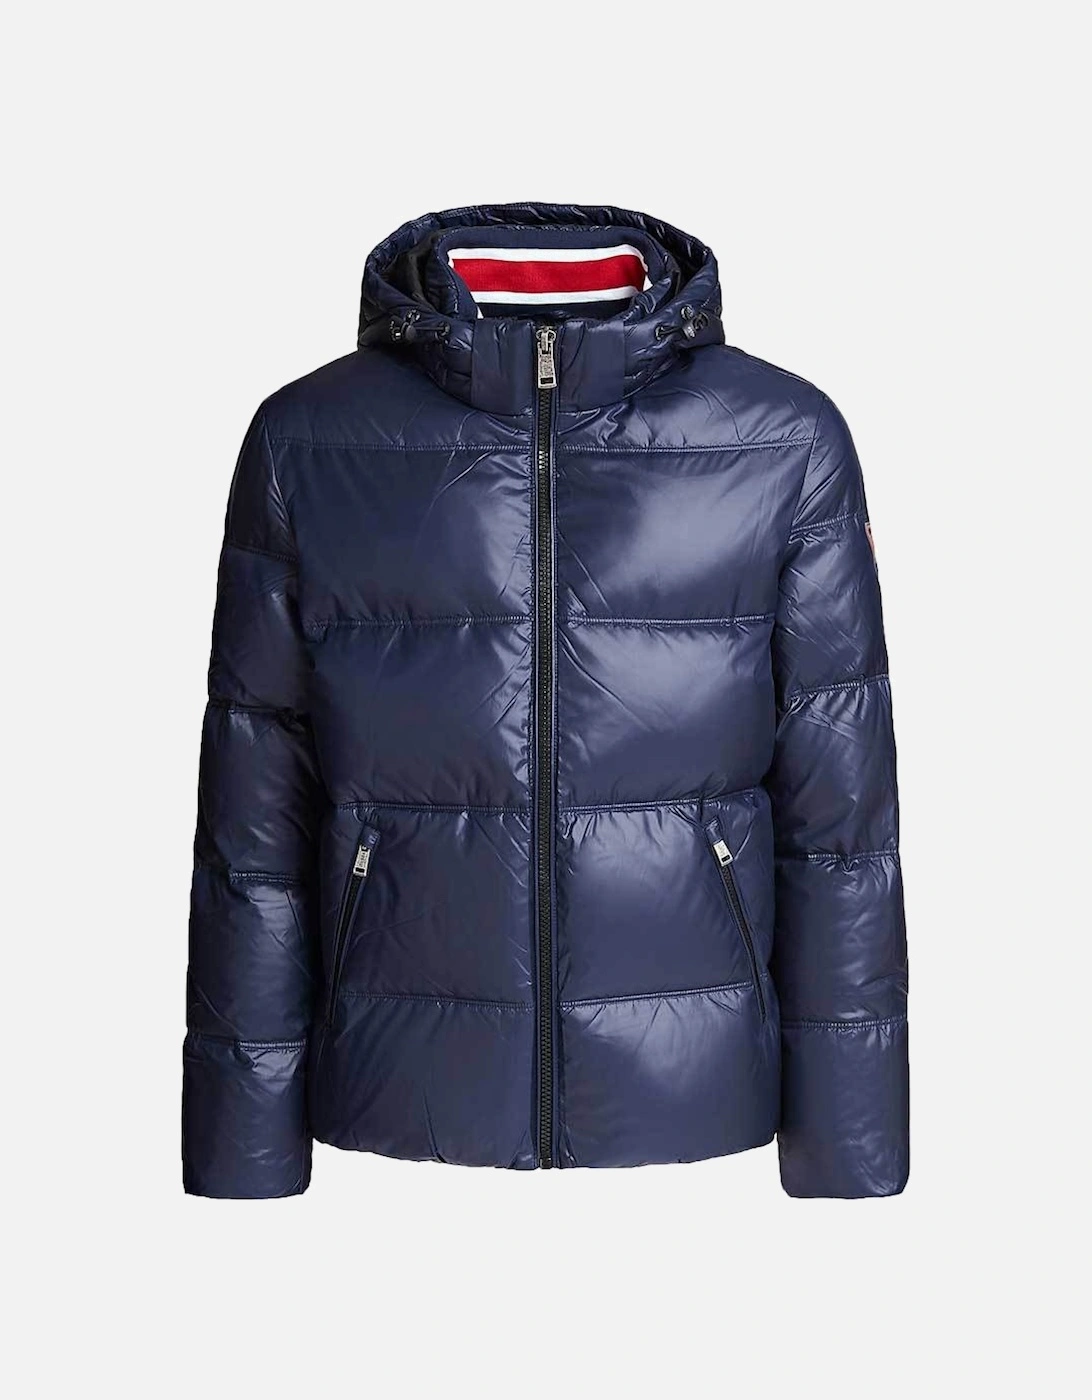 Hooded Puffer Jacket - Blue Navy M94L42